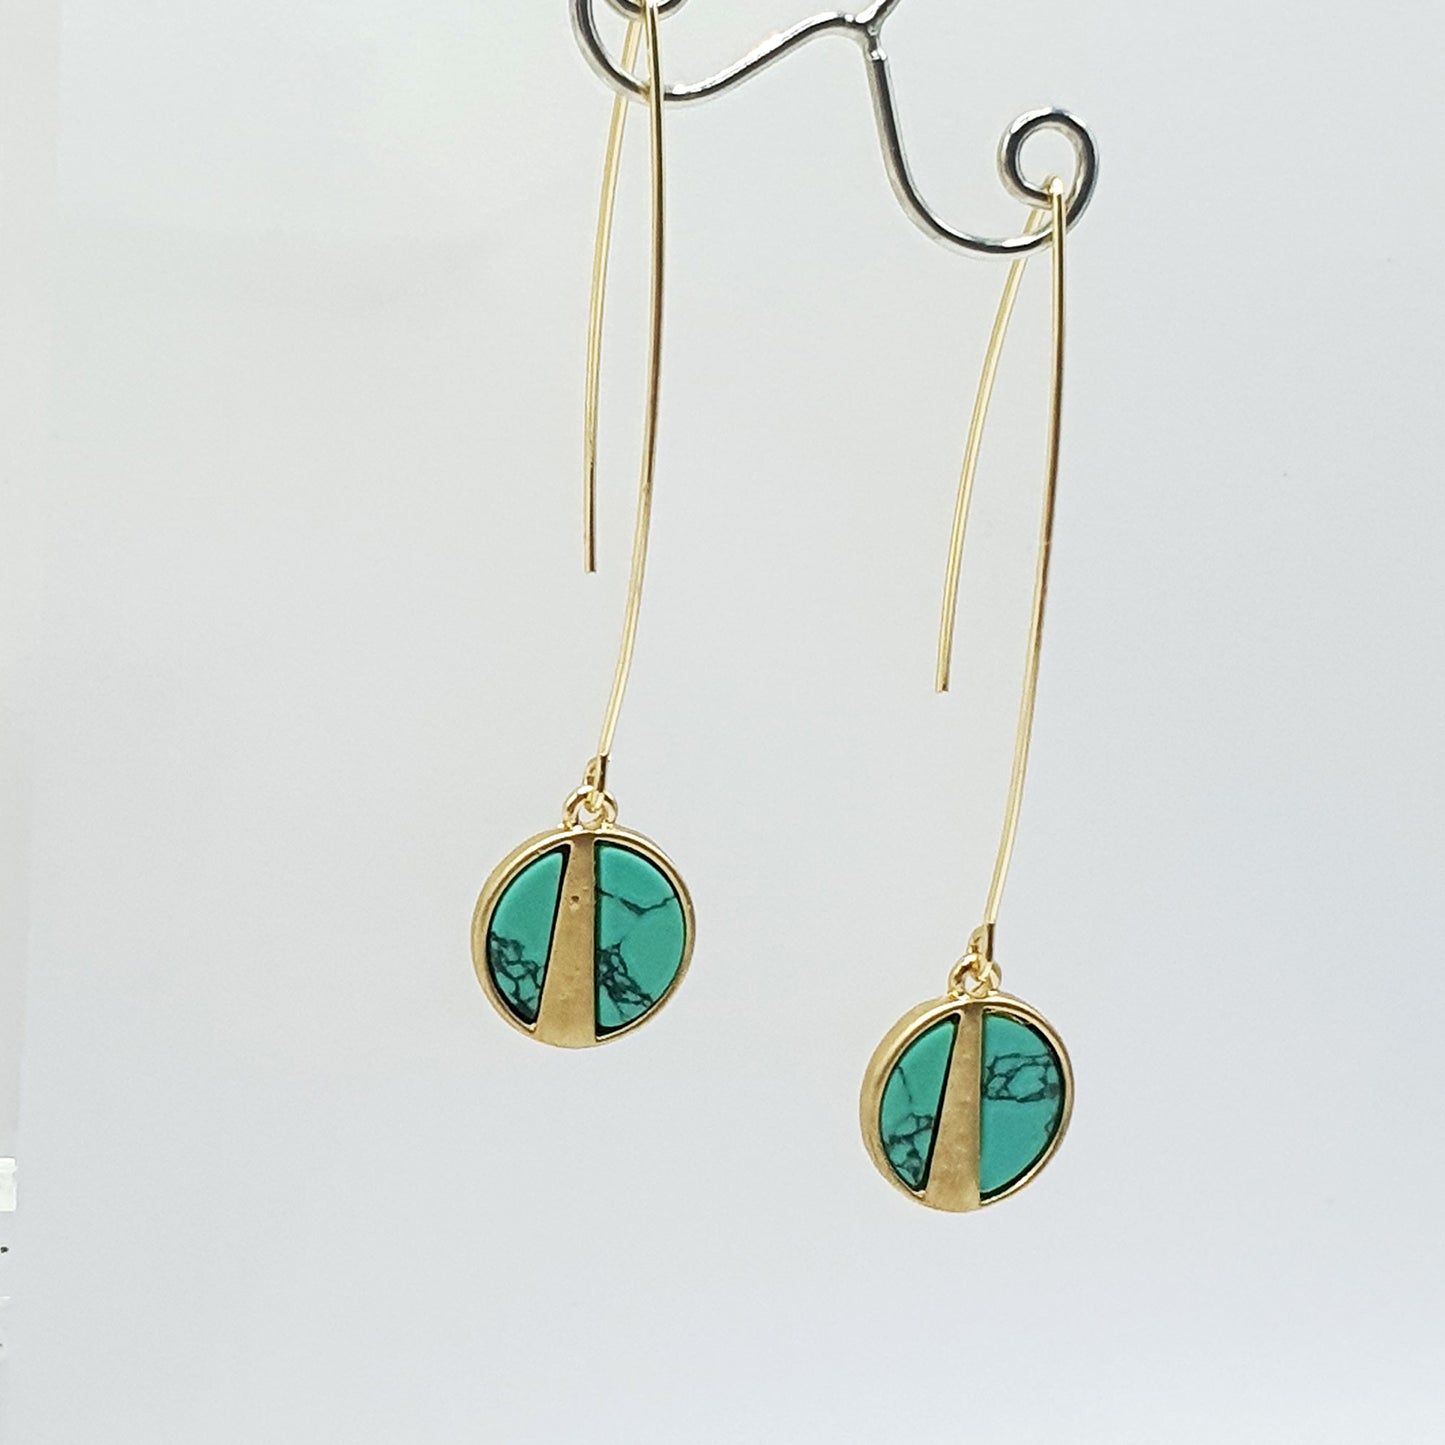 Marbled blue howlite discs in gold plate on long oval earwires